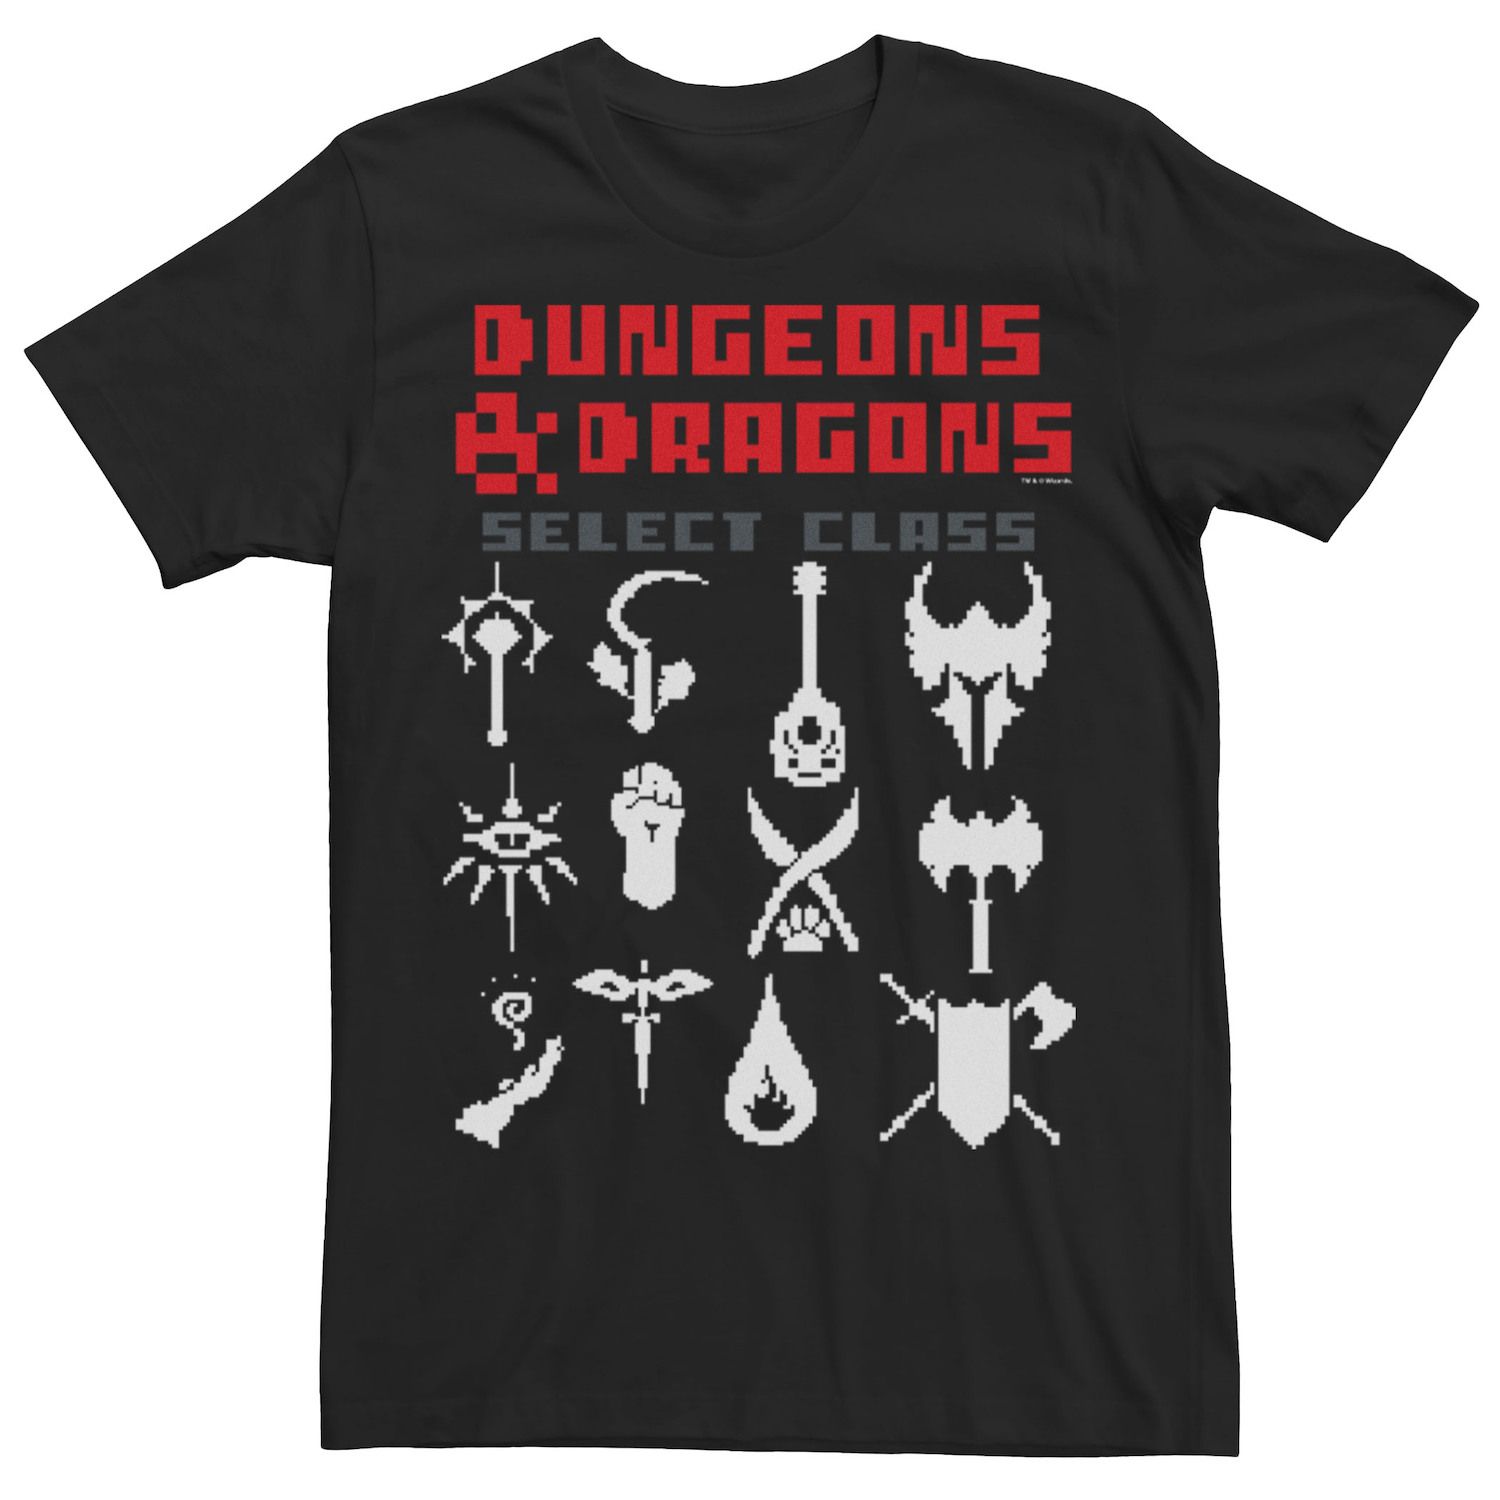 Image for Licensed Character Big & Tall Dungeons & Dragons Select Class 8-Bit Logos Tee at Kohl's.